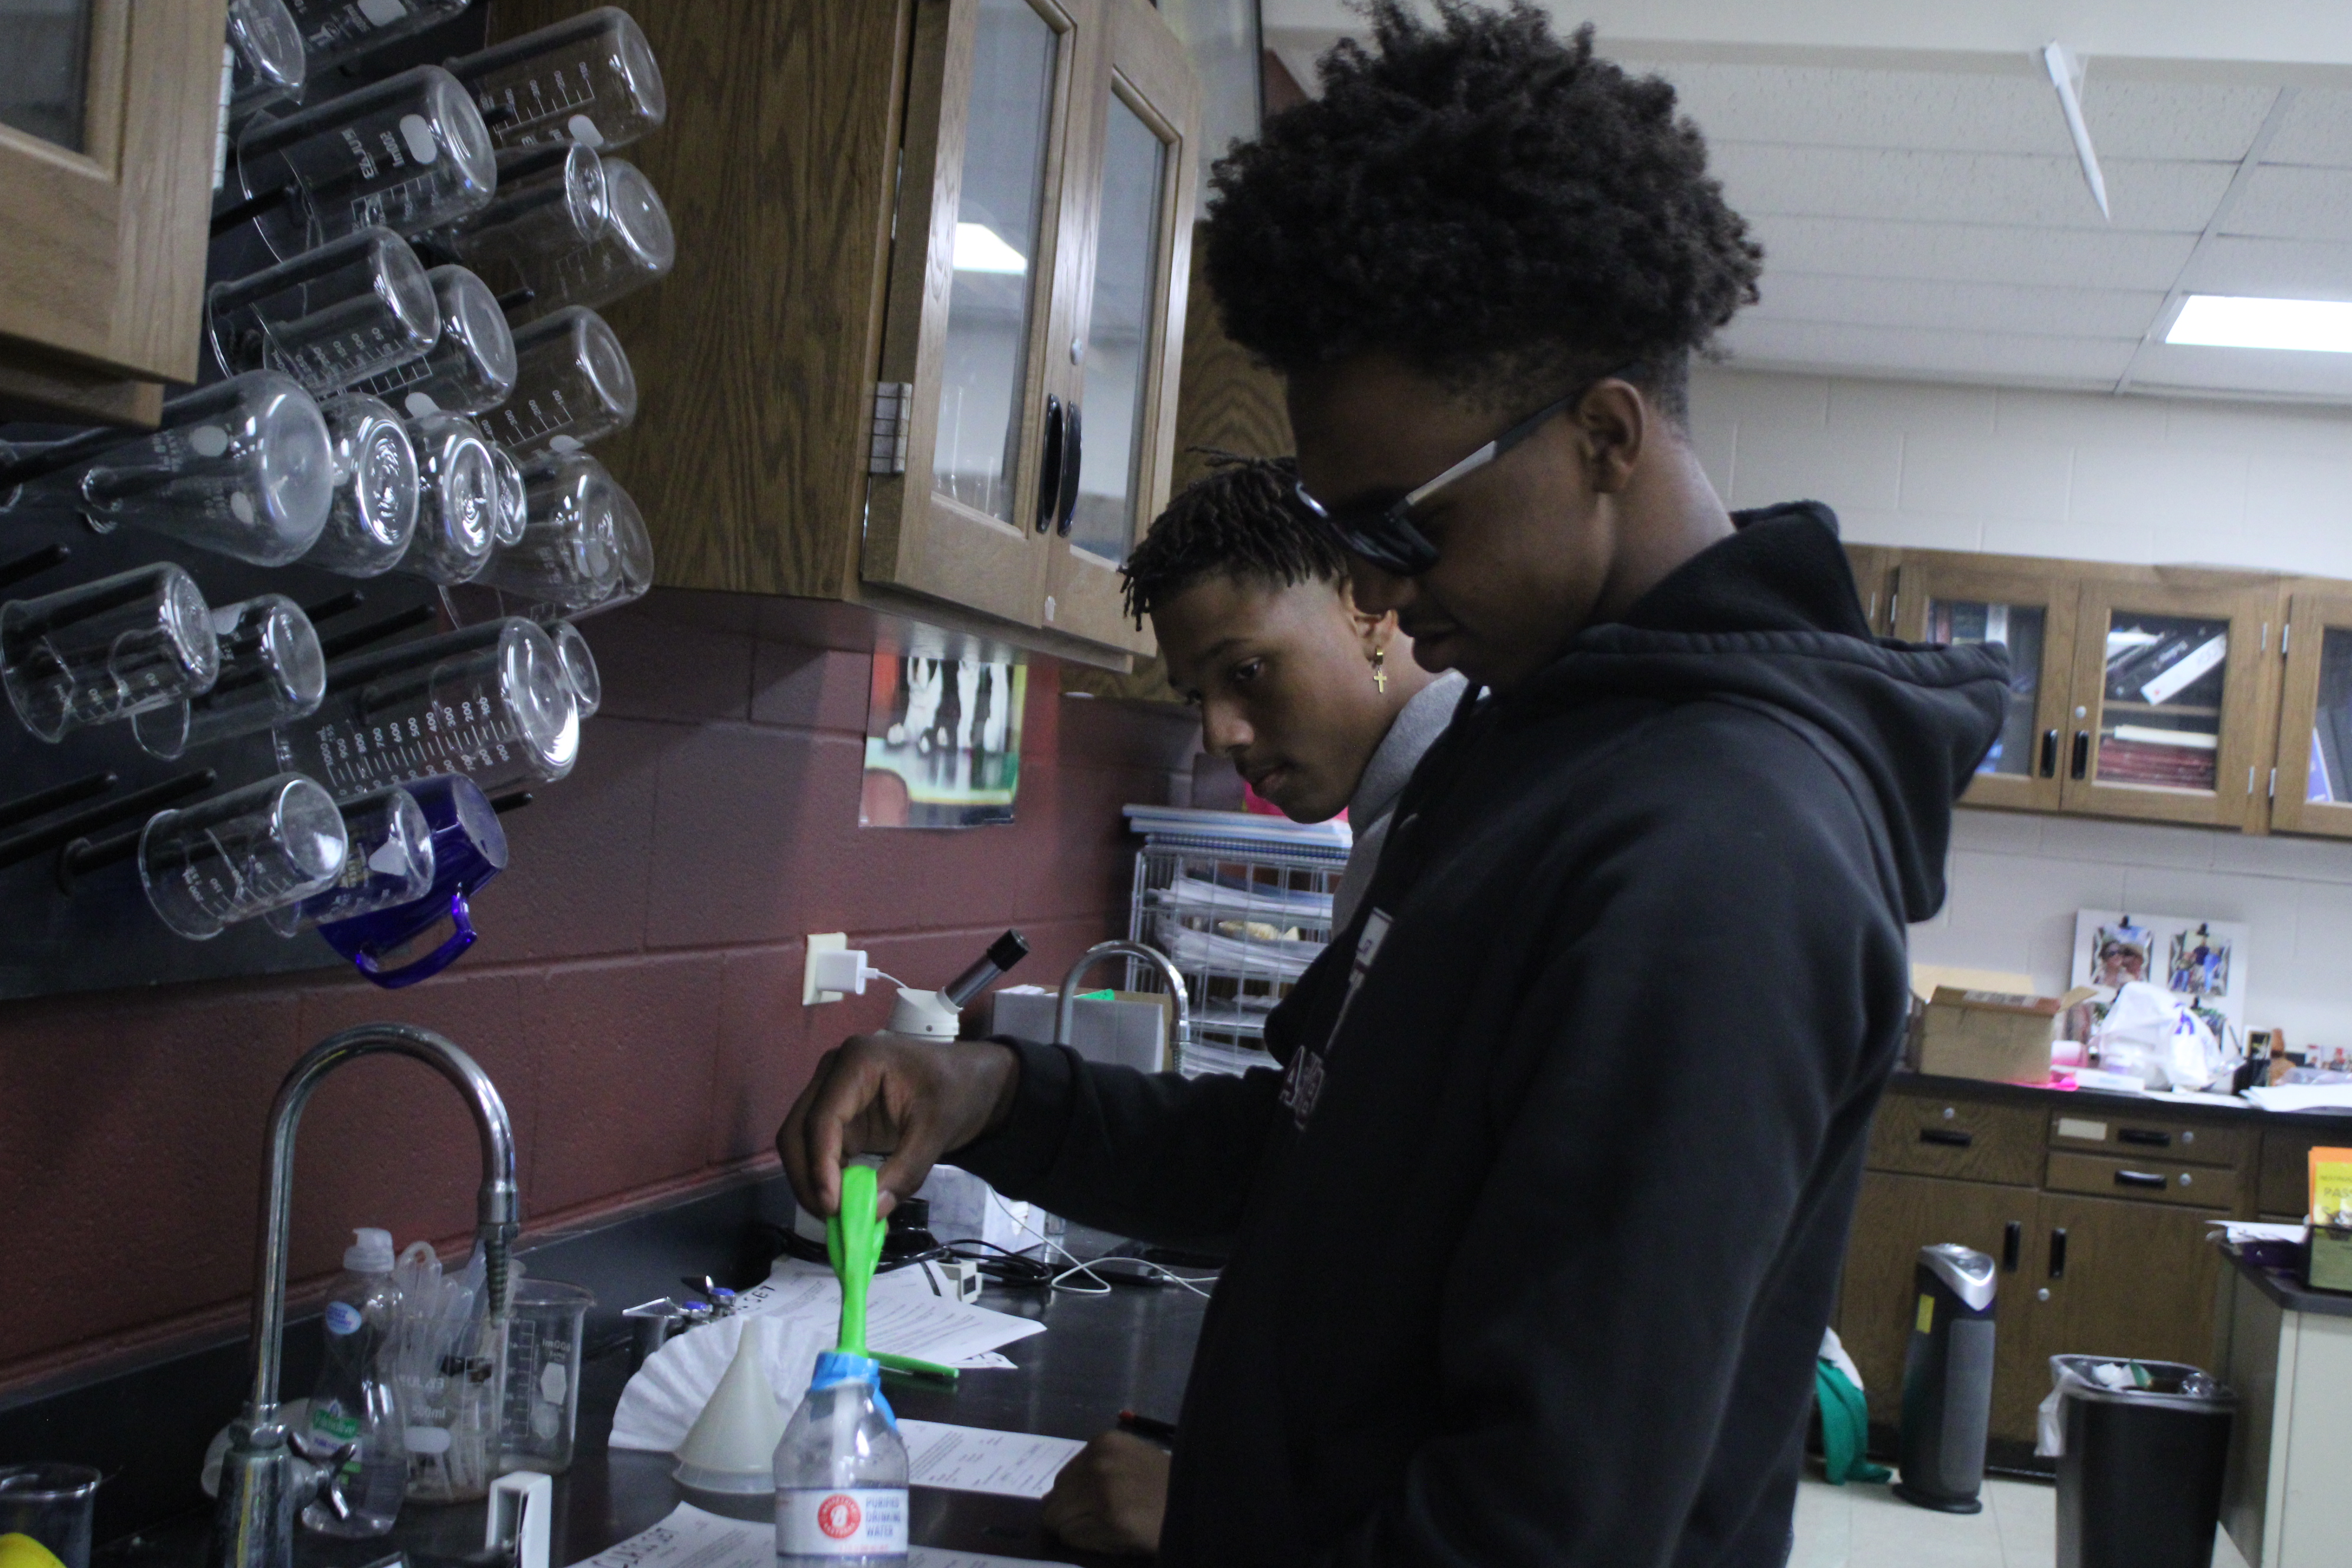 Two students working on a baking soda and vinegar chemistry experiment.